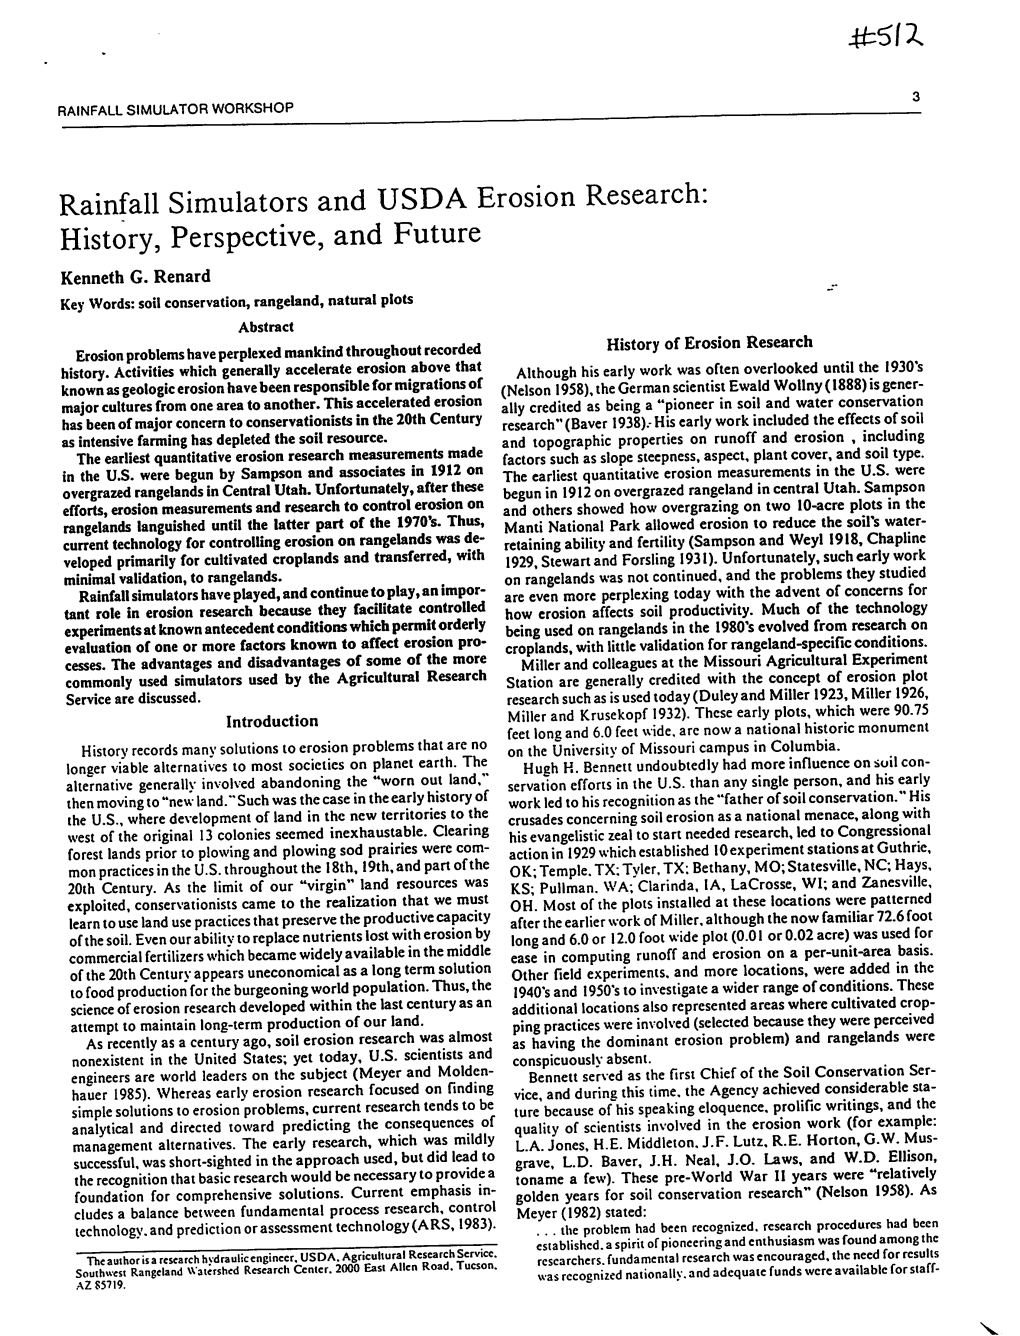 Rainfall Simulators and USDA Erosion Research: History, Perspective, and Future